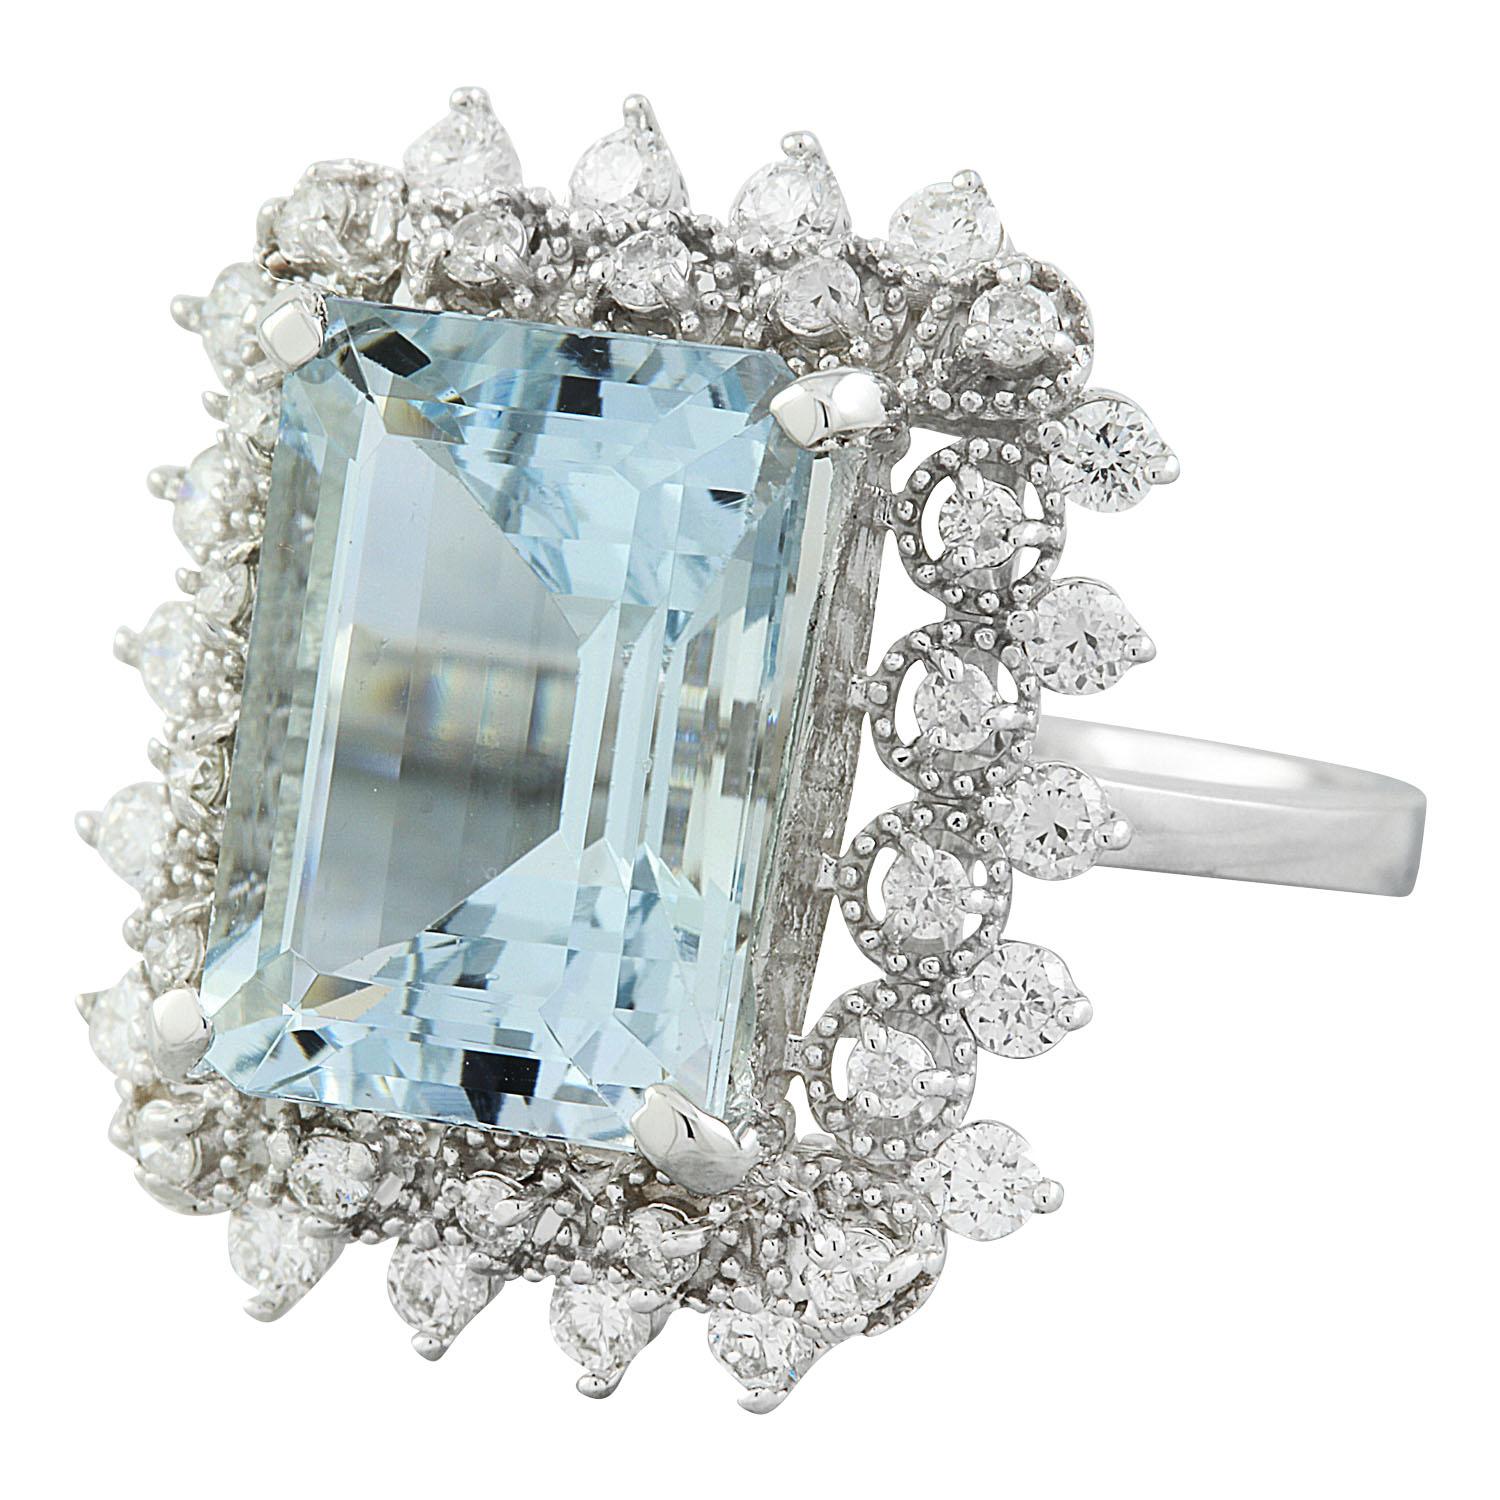 7.67 Carat Natural Aquamarine 14 Karat Solid White Gold Diamond Ring
Stamped: 14K 
Total Ring Weight: 5.5 Grams 
Aquamarine Weight 6.87 Carat (14.00x10.00 Millimeters)
Diamond Weight: 0.80 carat (F-G Color, VS2-SI1 Clarity )
Quantity: 36
Face